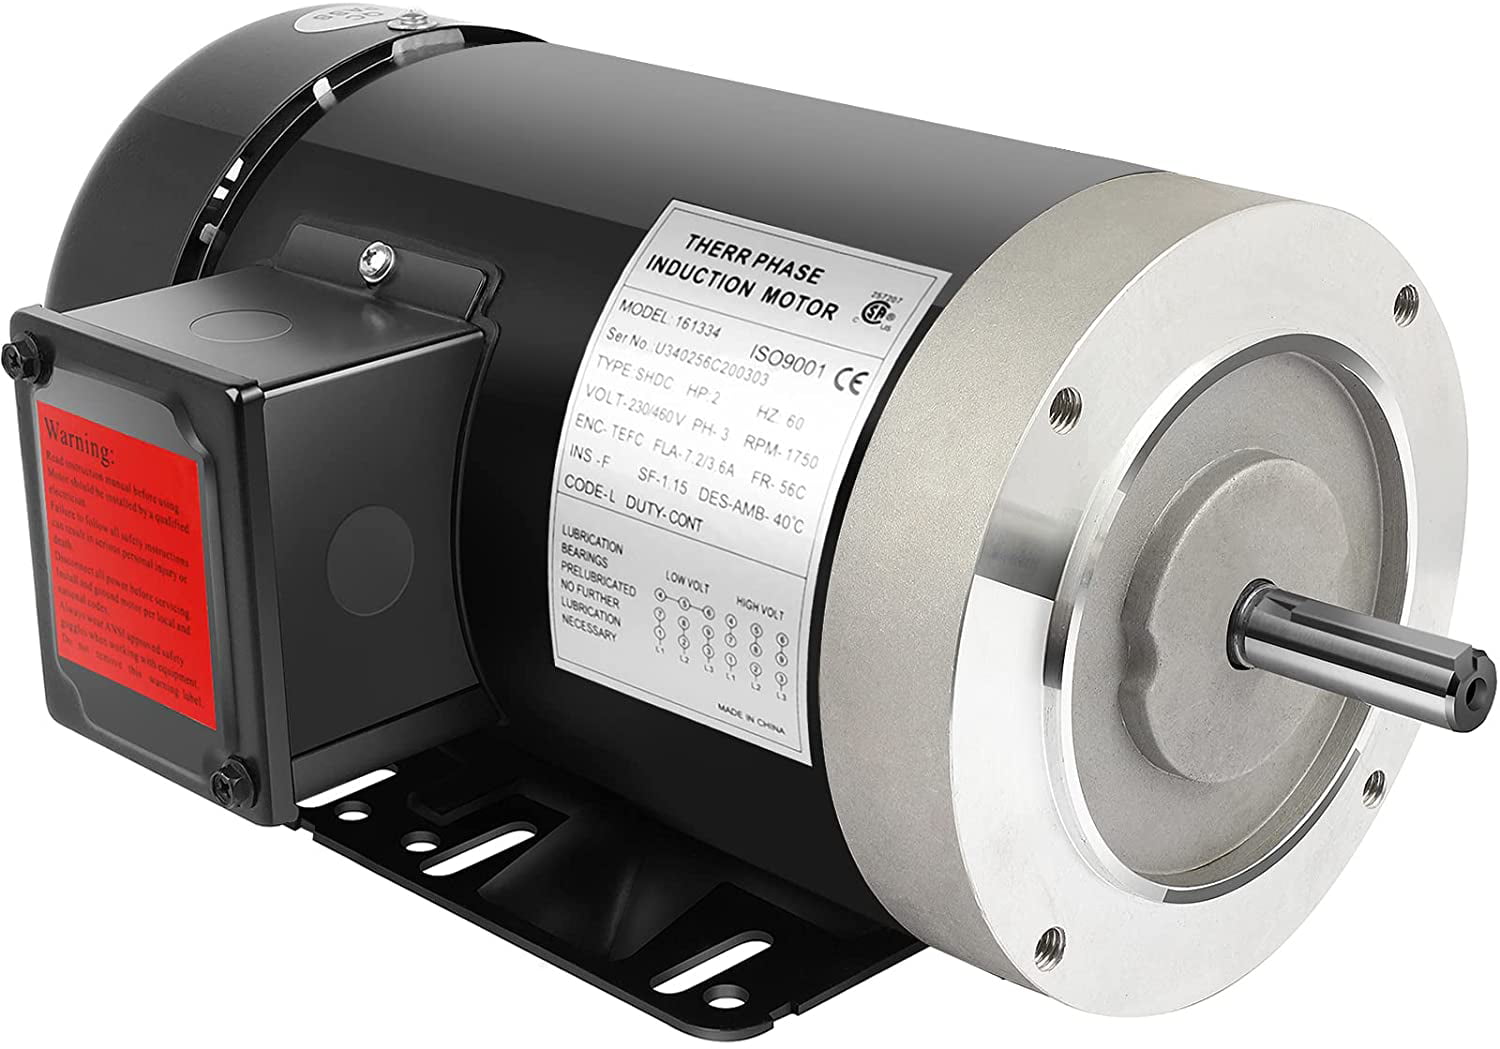 2HP 1800 RP 3 PHASE STAINLESS STEEL ELECTRIC MOTOR  56C FREE SHIPPING 